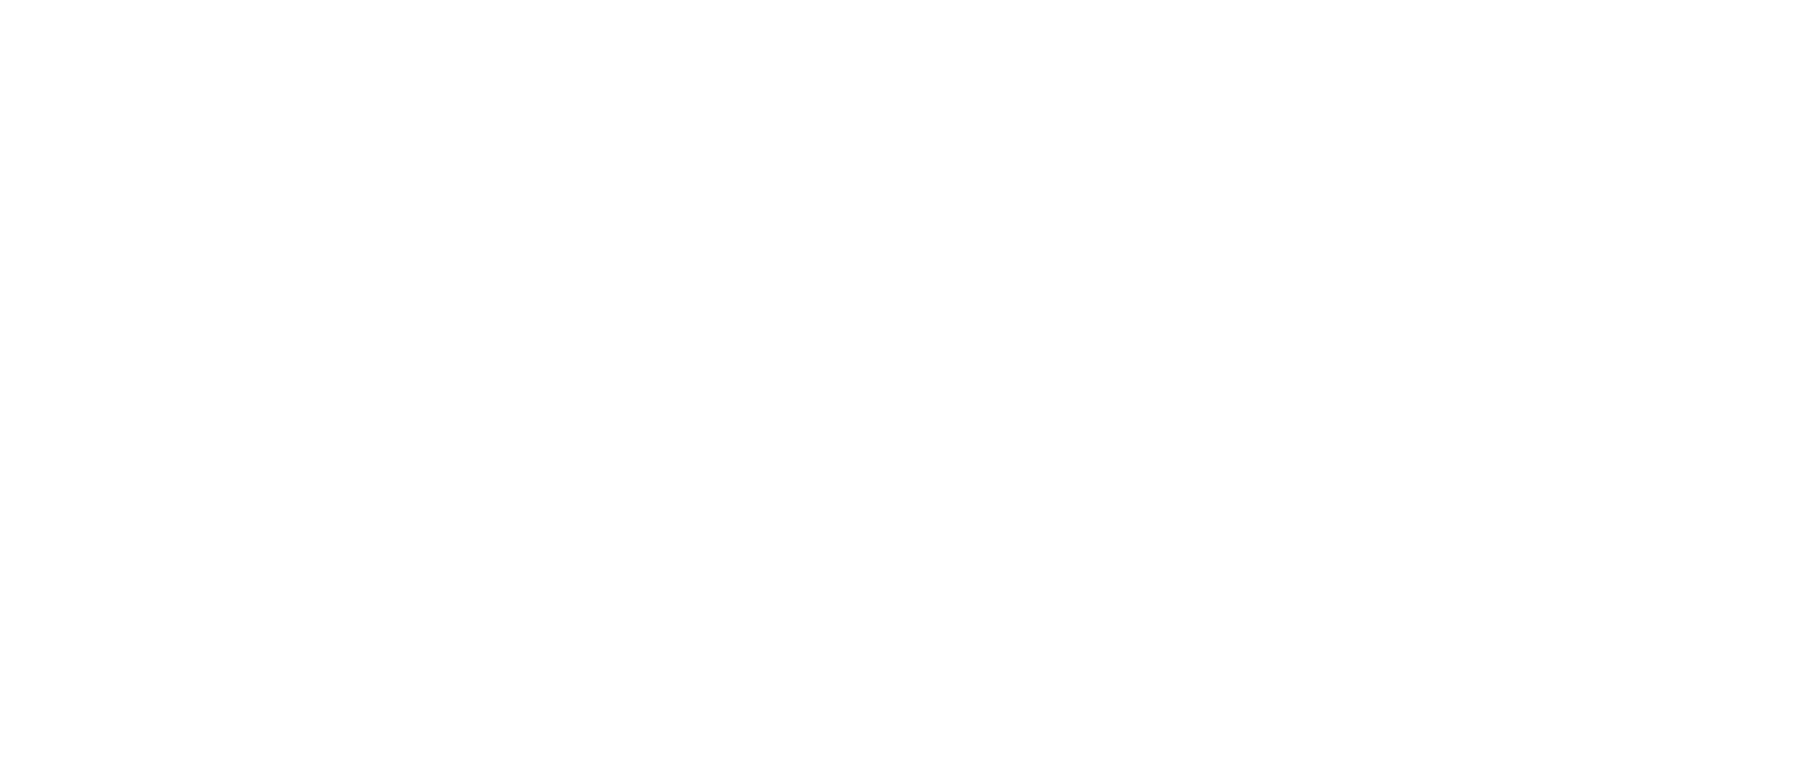 Intouch Insight Logo White-2